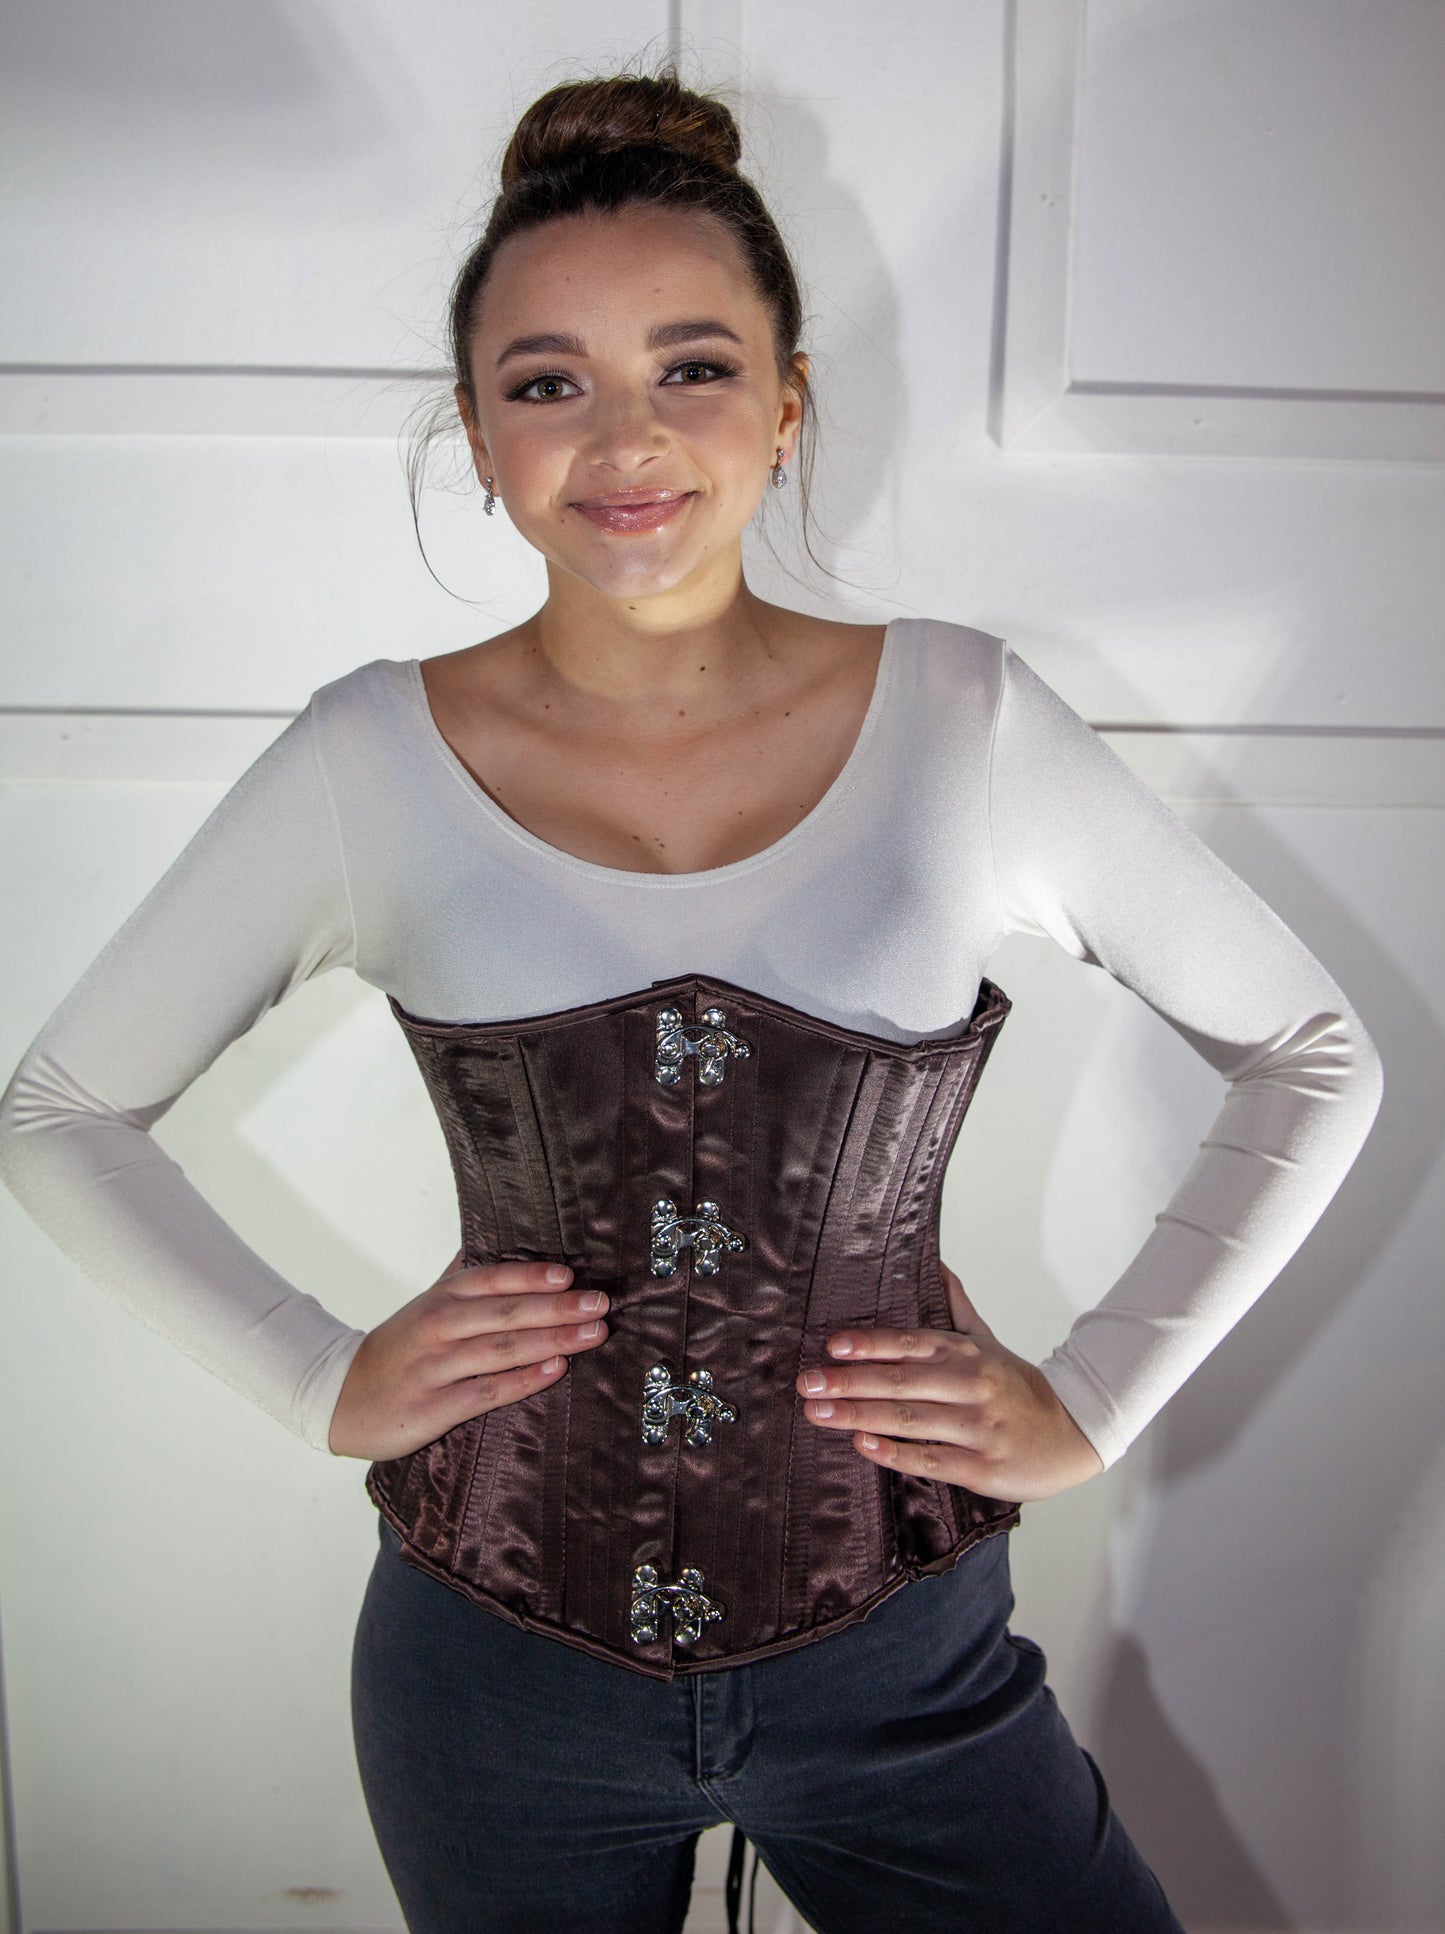 Corset - Brown Satin Underbust with Clasps